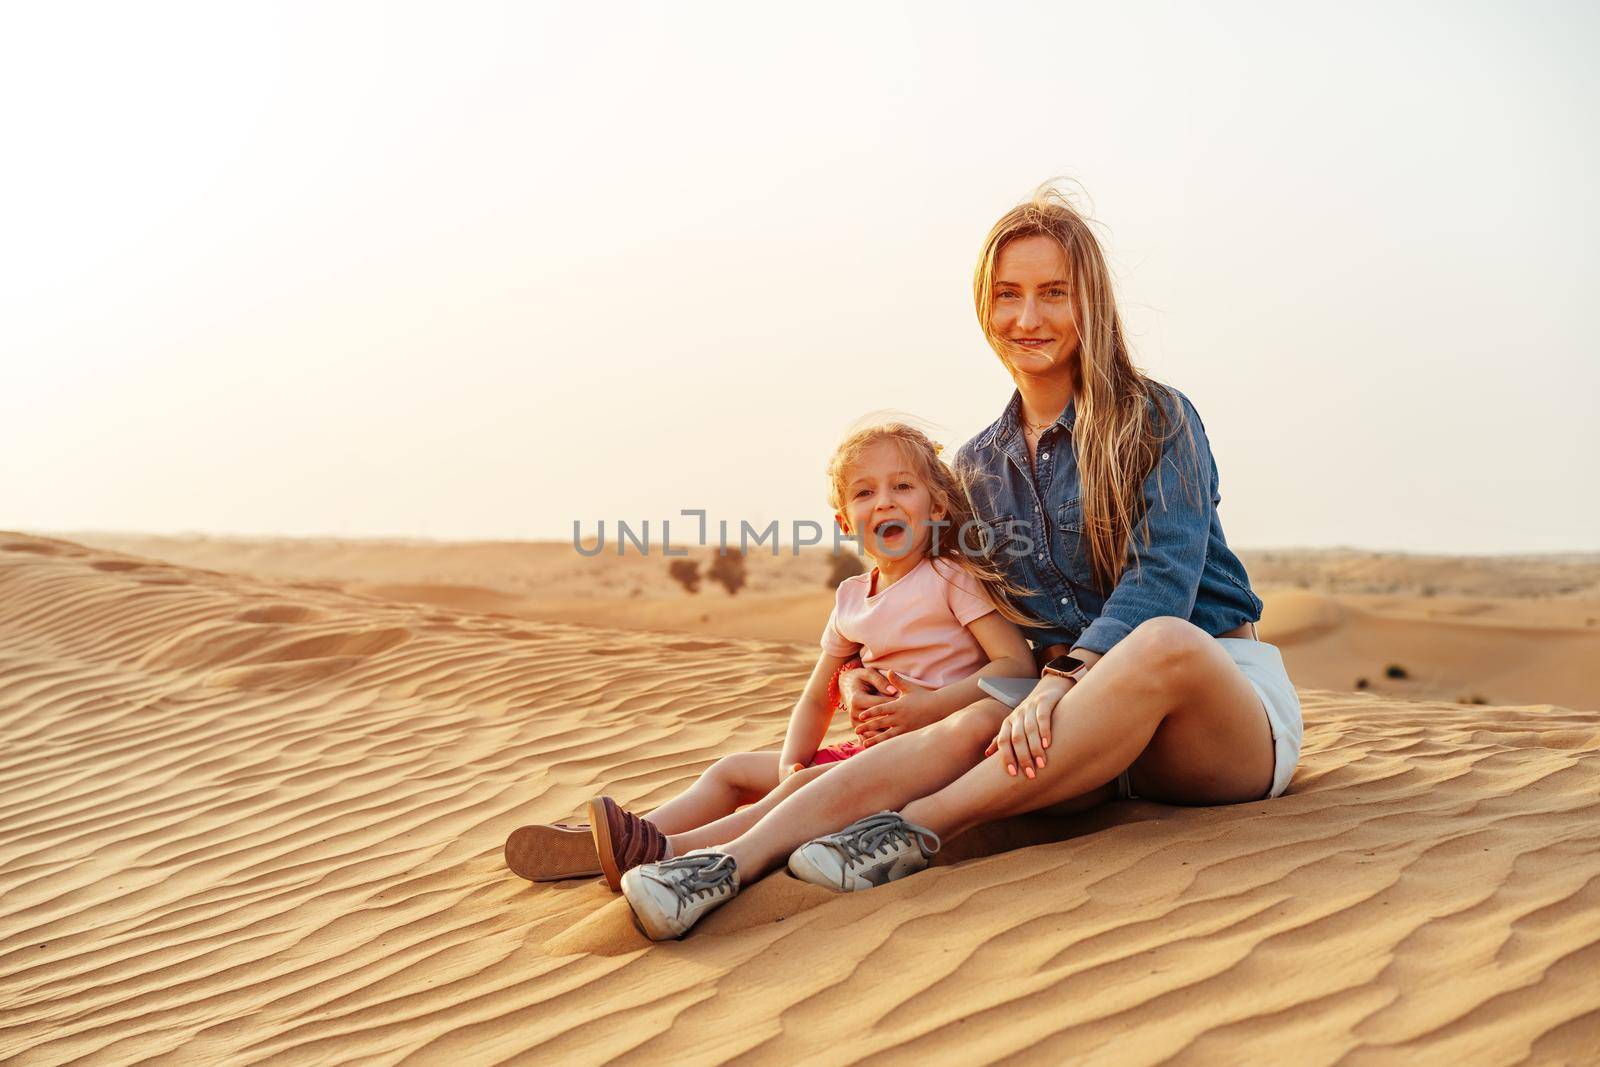 Mother and daughter sitting together on sand dune in the Dubai desert, travel with children concept